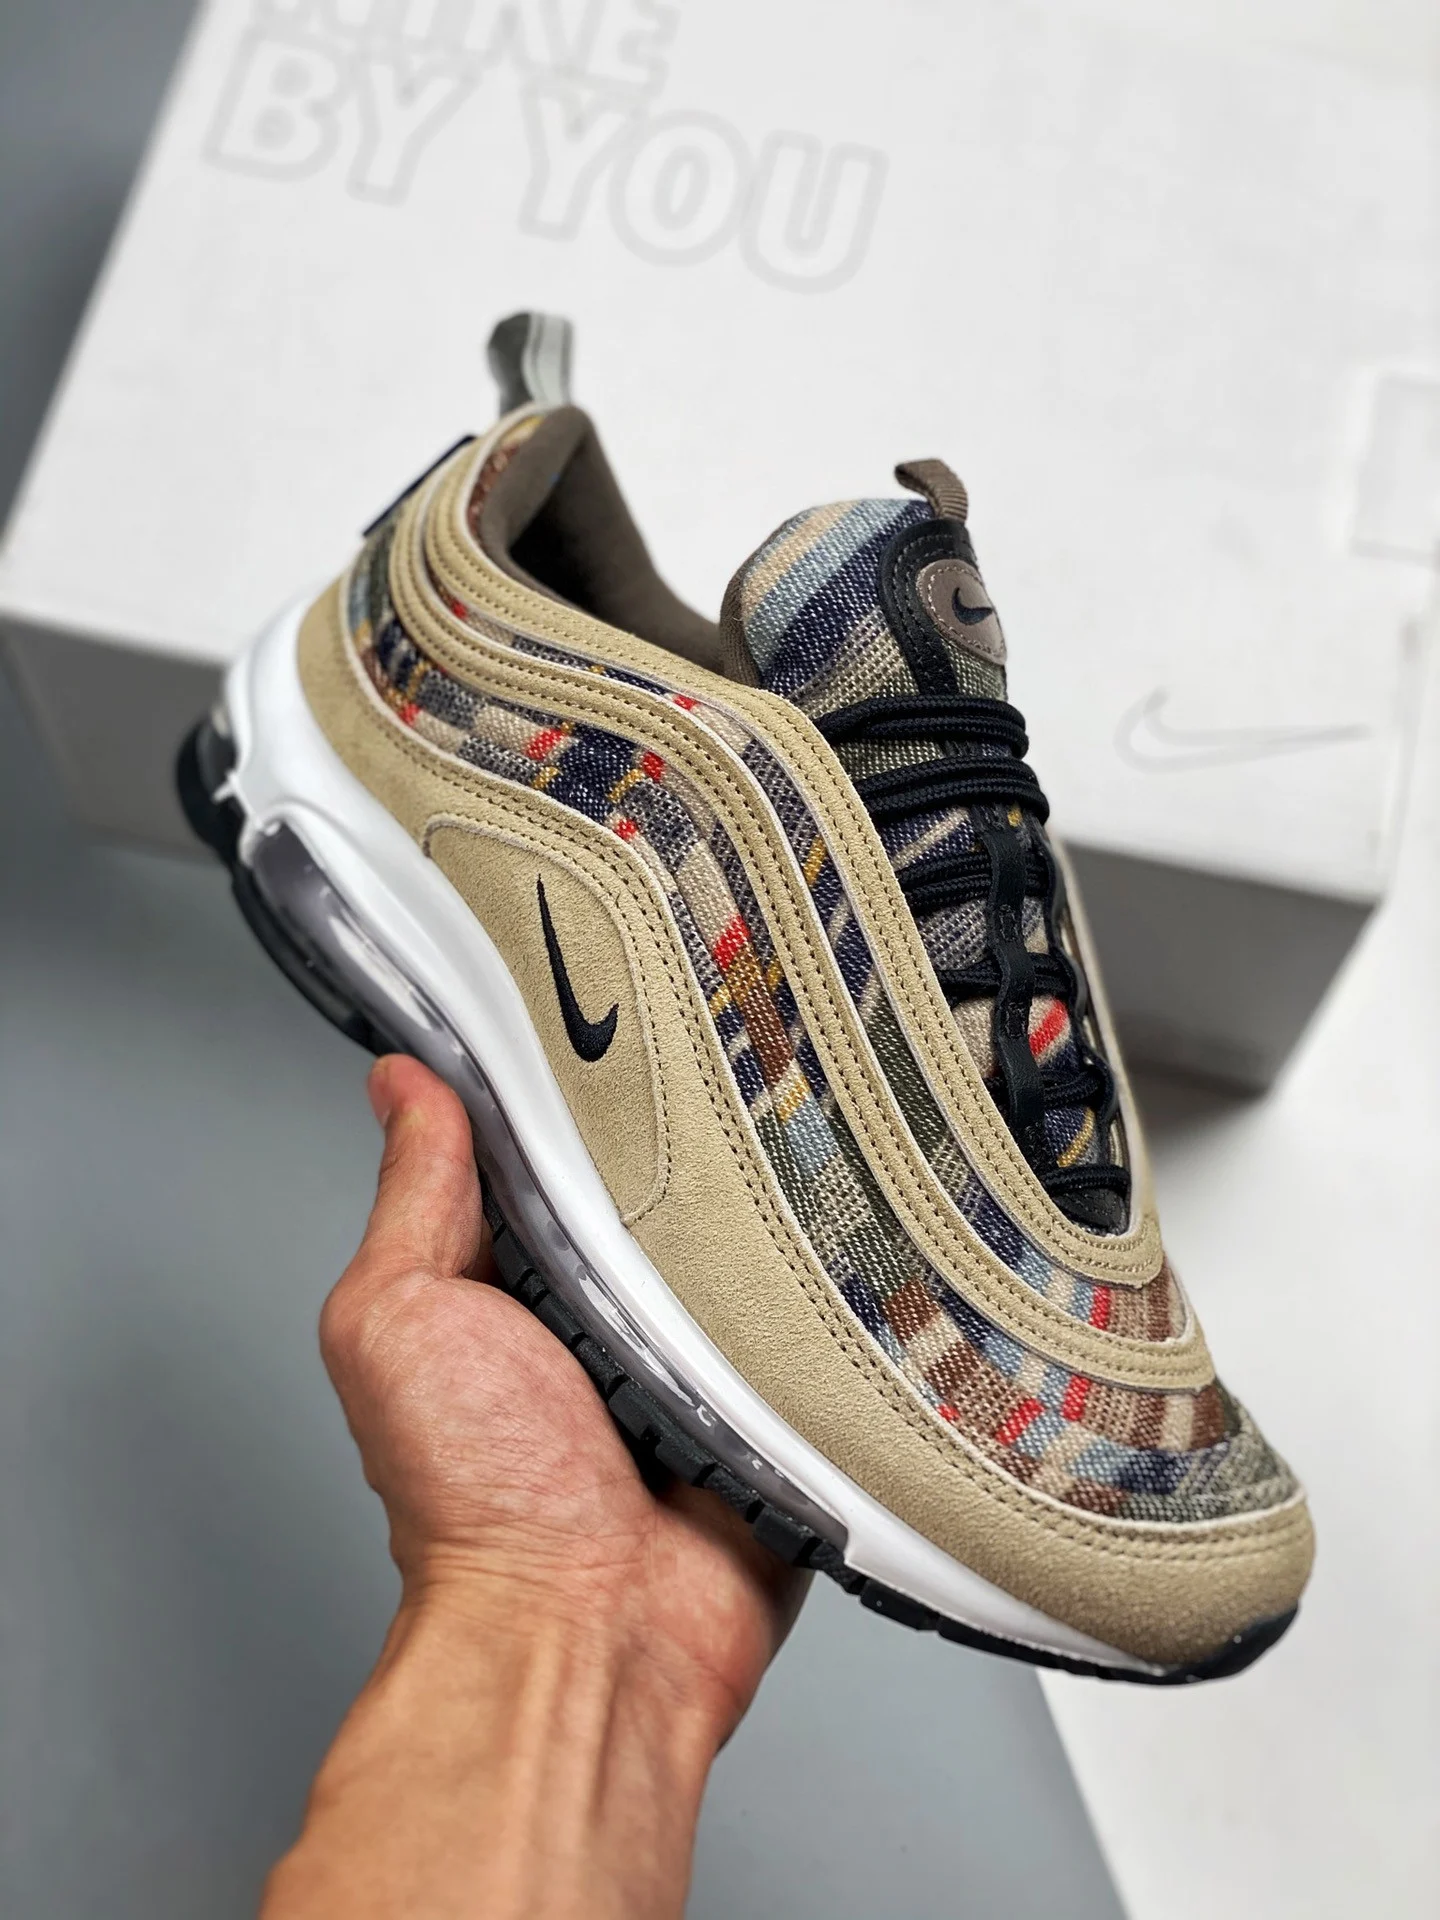 Pendleton x Nike Air Max 97 By You Multi DC3494-991 For Sale